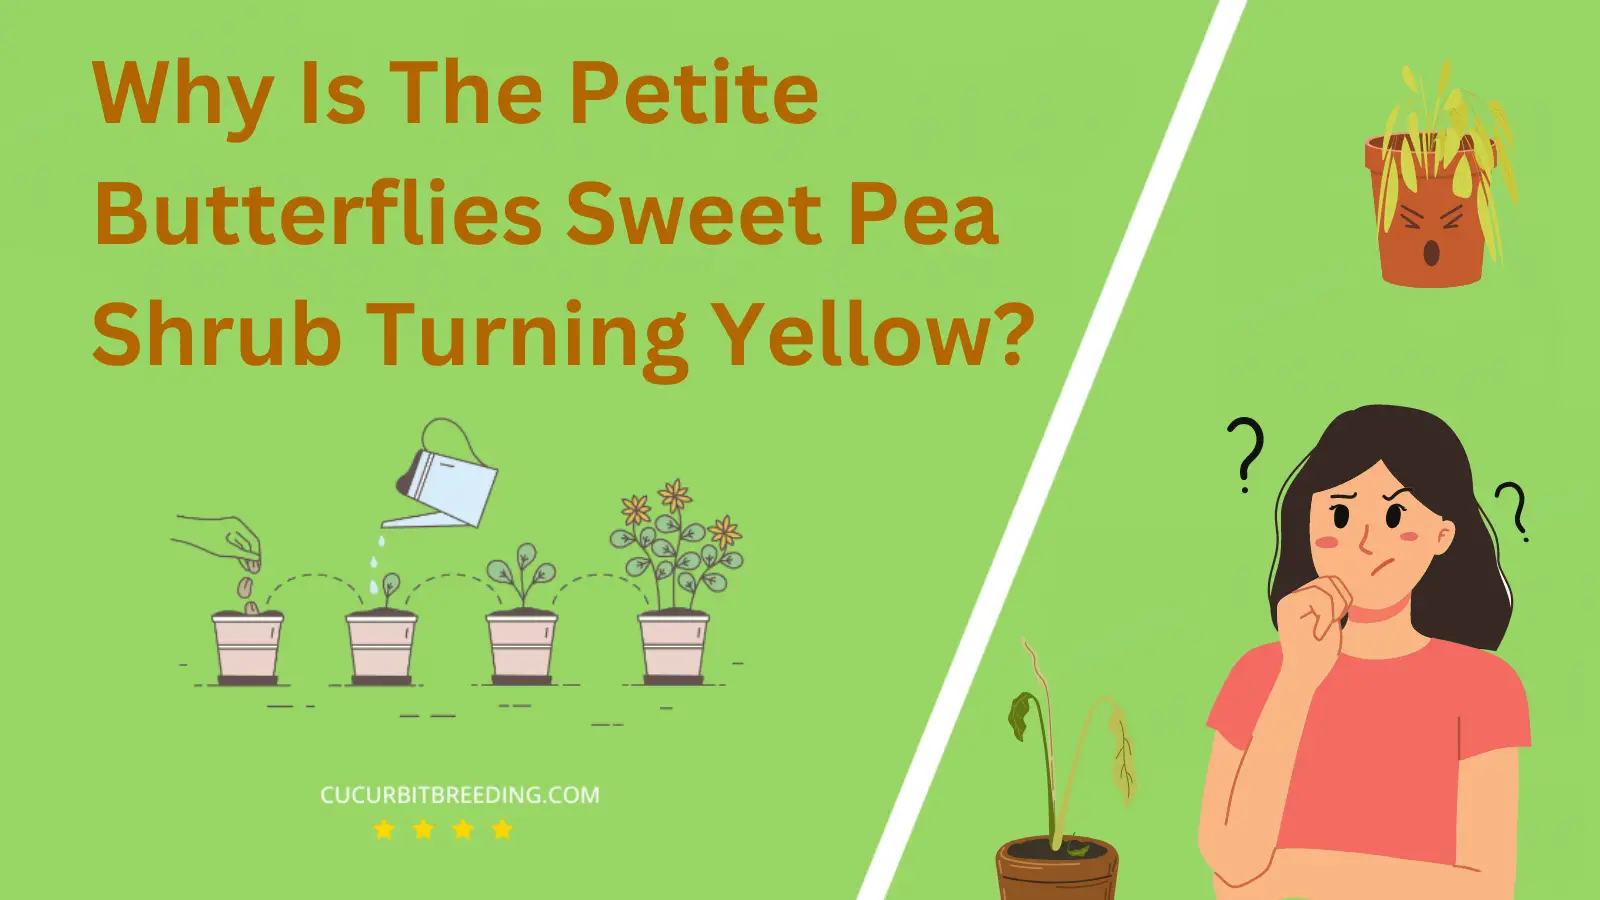 Why Is The Petite Butterflies Sweet Pea Shrub Turning Yellow